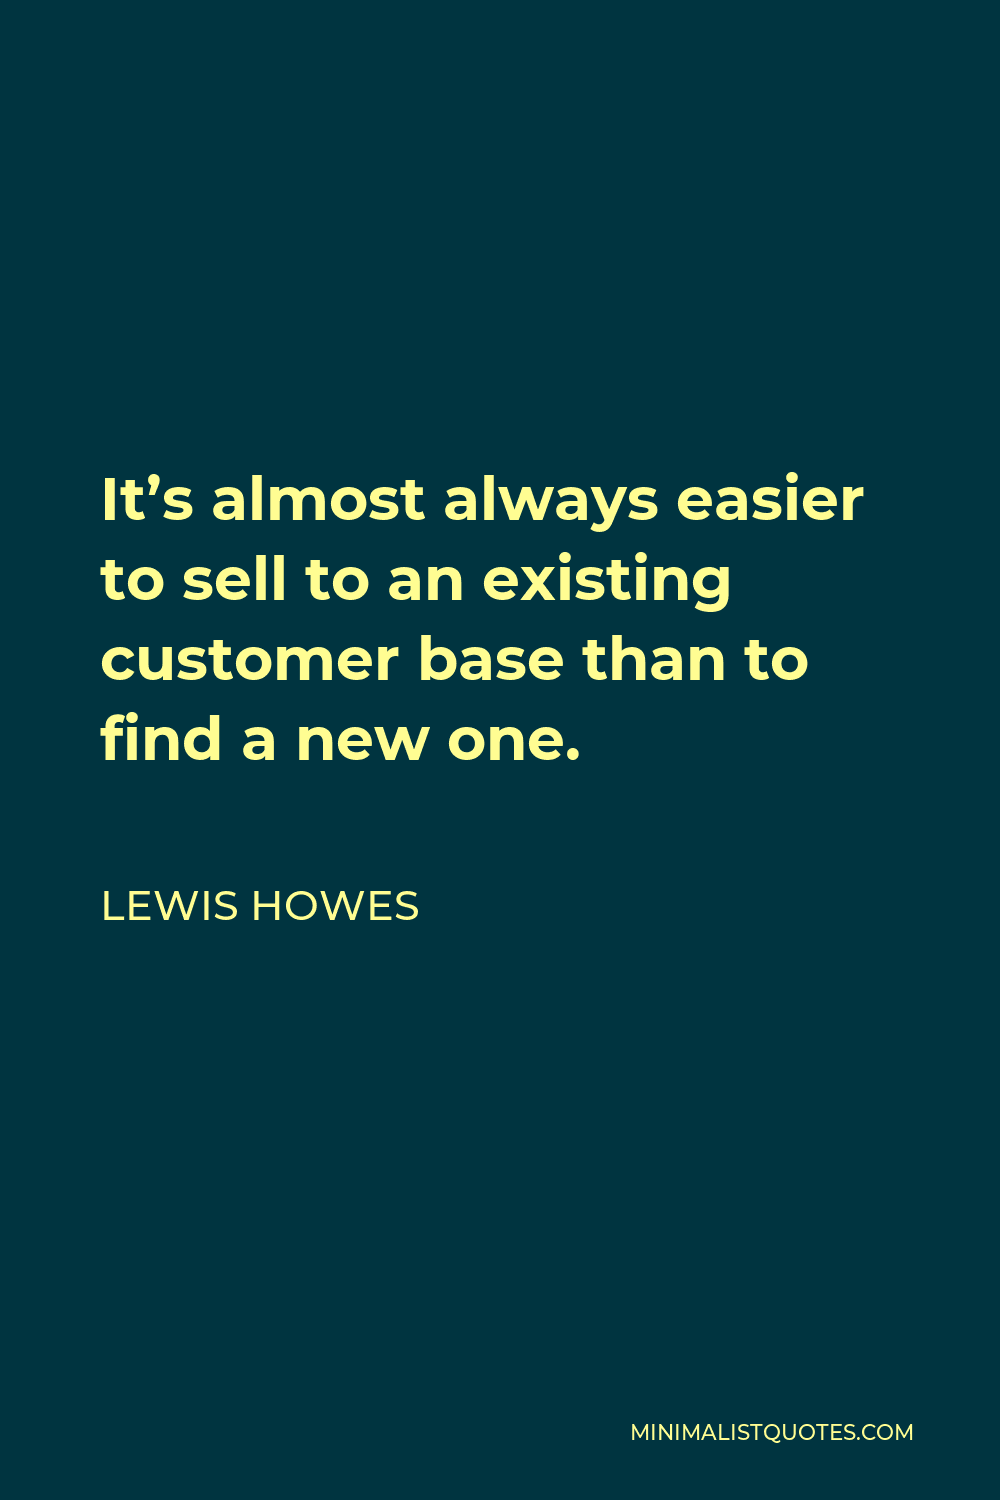 Lewis Howes Quote - It’s almost always easier to sell to an existing customer base than to find a new one.